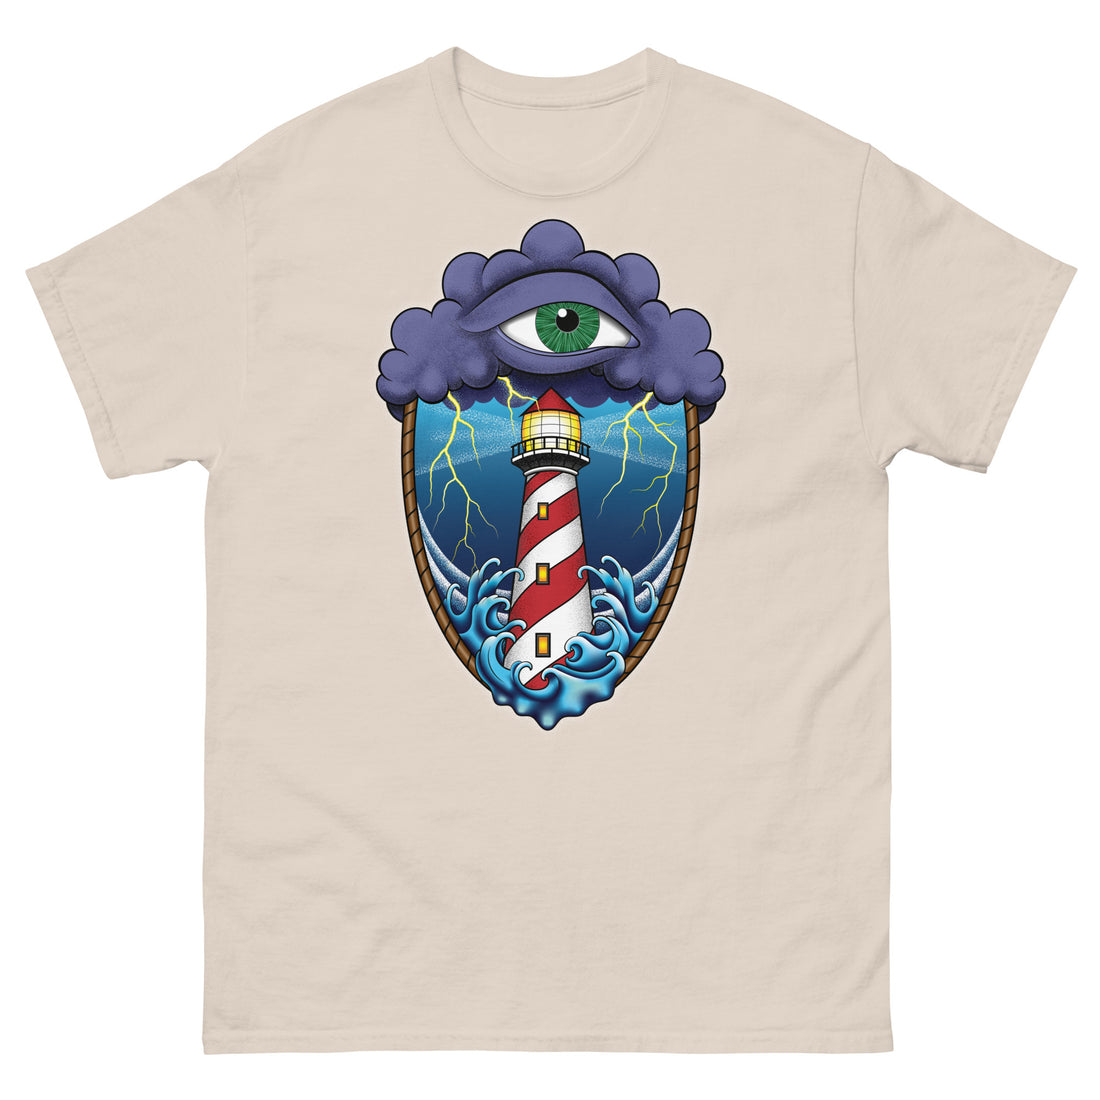 A beige t-shirt with an old school eye of the storm tattoo design of large dark purple storm clouds at the top of the design with a green eye in the middle of the clouds.  Below the clouds is an oval shape with brown rope. Inside the rope are stormy seas and a lighthouse with lightning striking in the background.  At the bottom of the design, some of the waves are spilling out of the rope barrier. The sky and seas are hues of blue; the lighthouse is white and red striped like a barber pole.